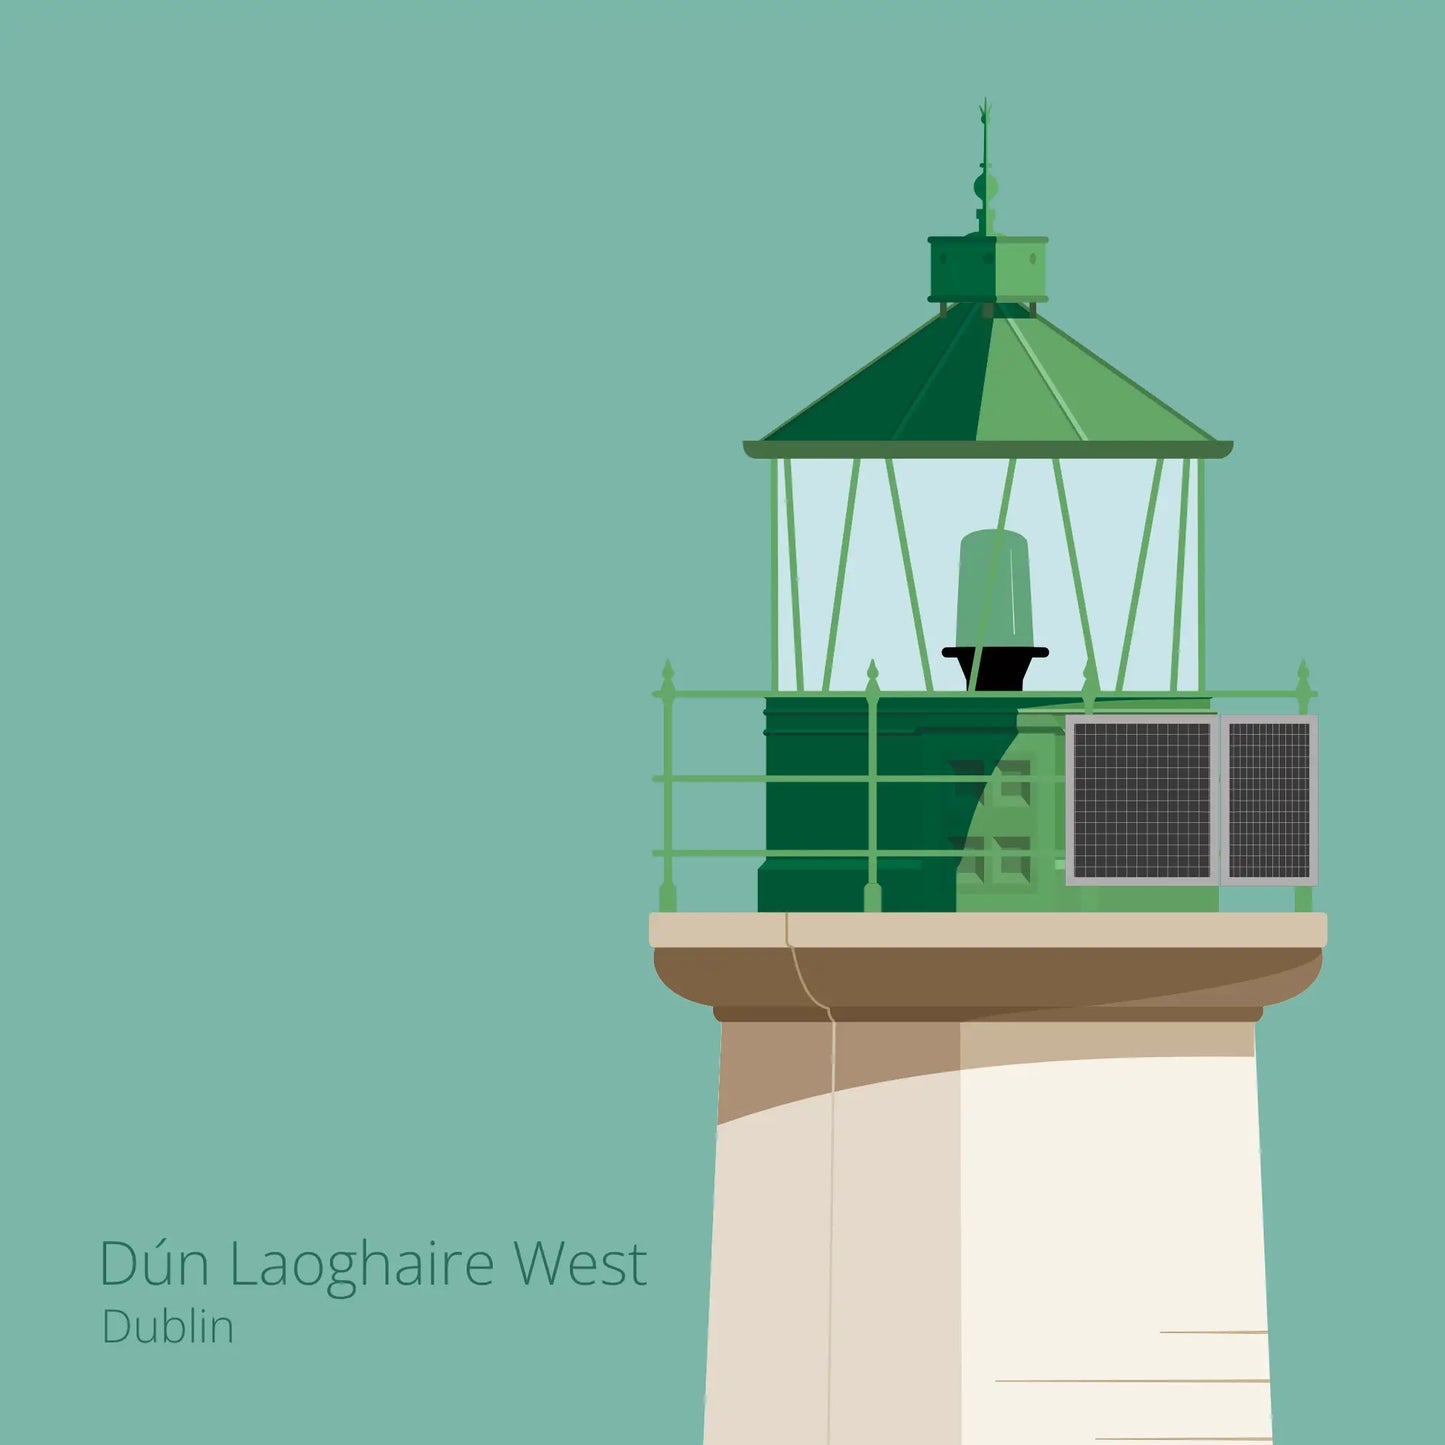 Illustration of Dún Laoghaire West lighthouse on an ocean green background